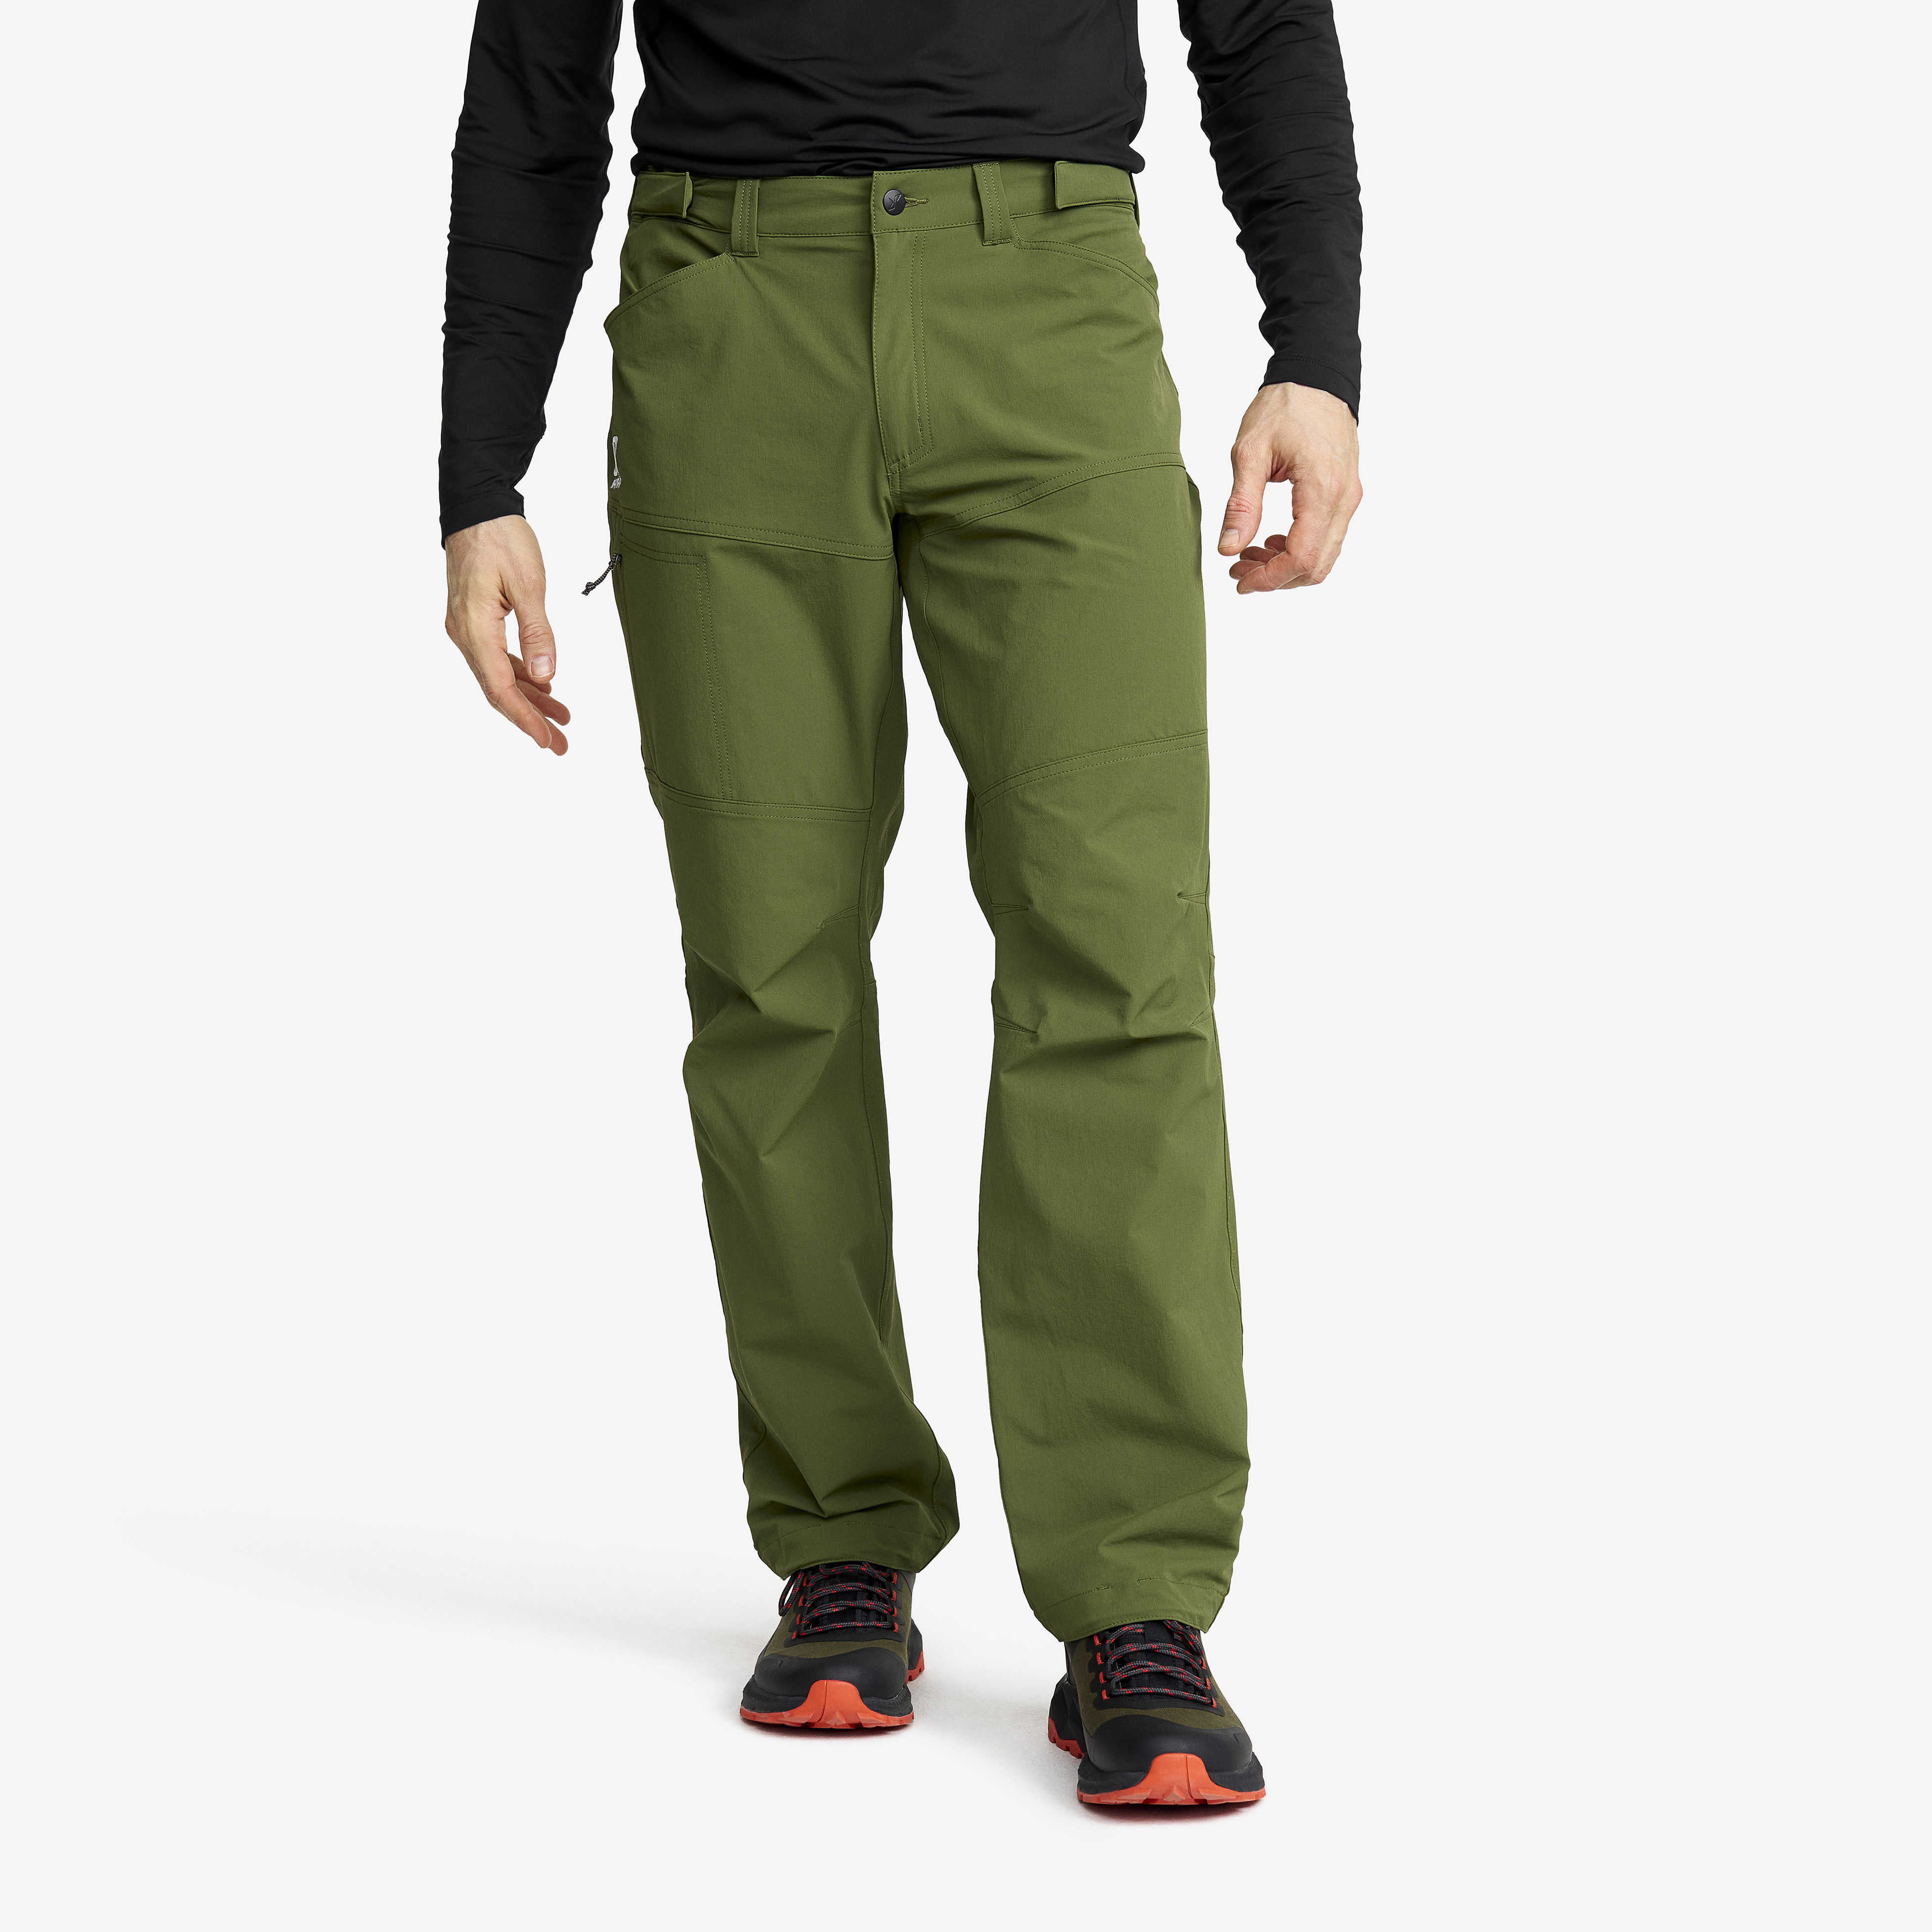 Venue Softstretch Pants Cypress Hombres